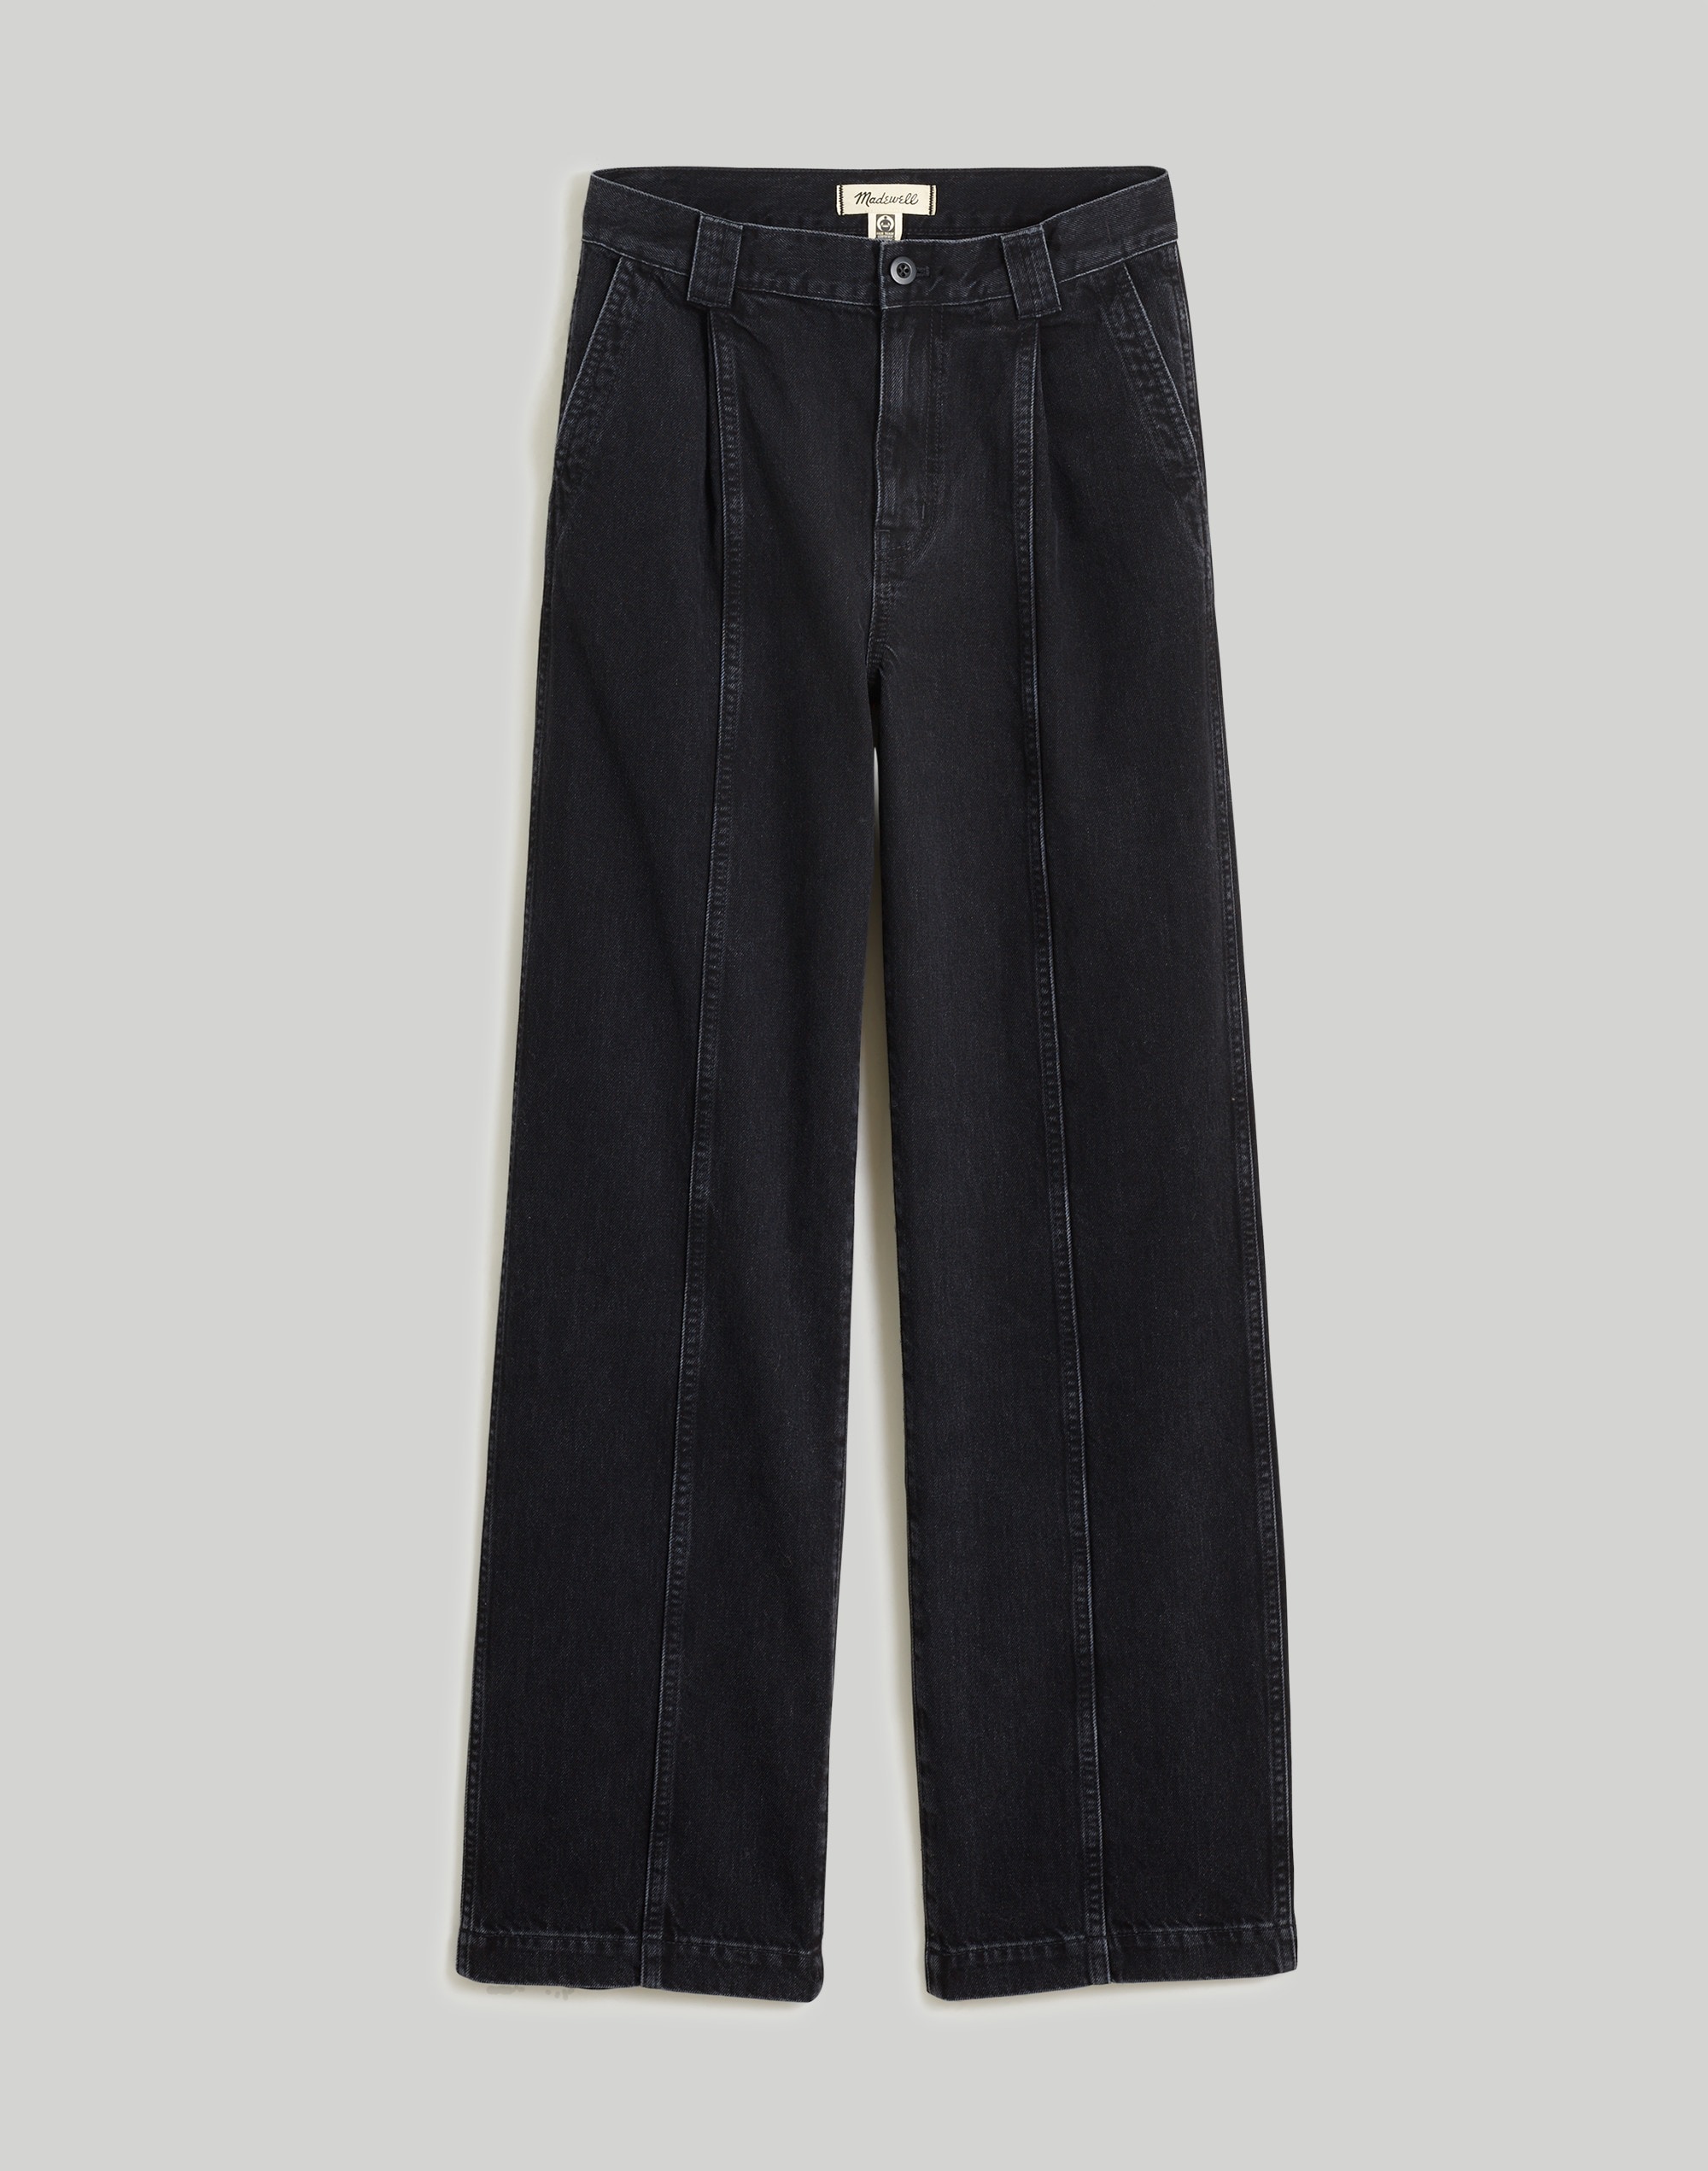 The Perfect Vintage Wide-Leg Jean Naylor Wash: Seam Edition